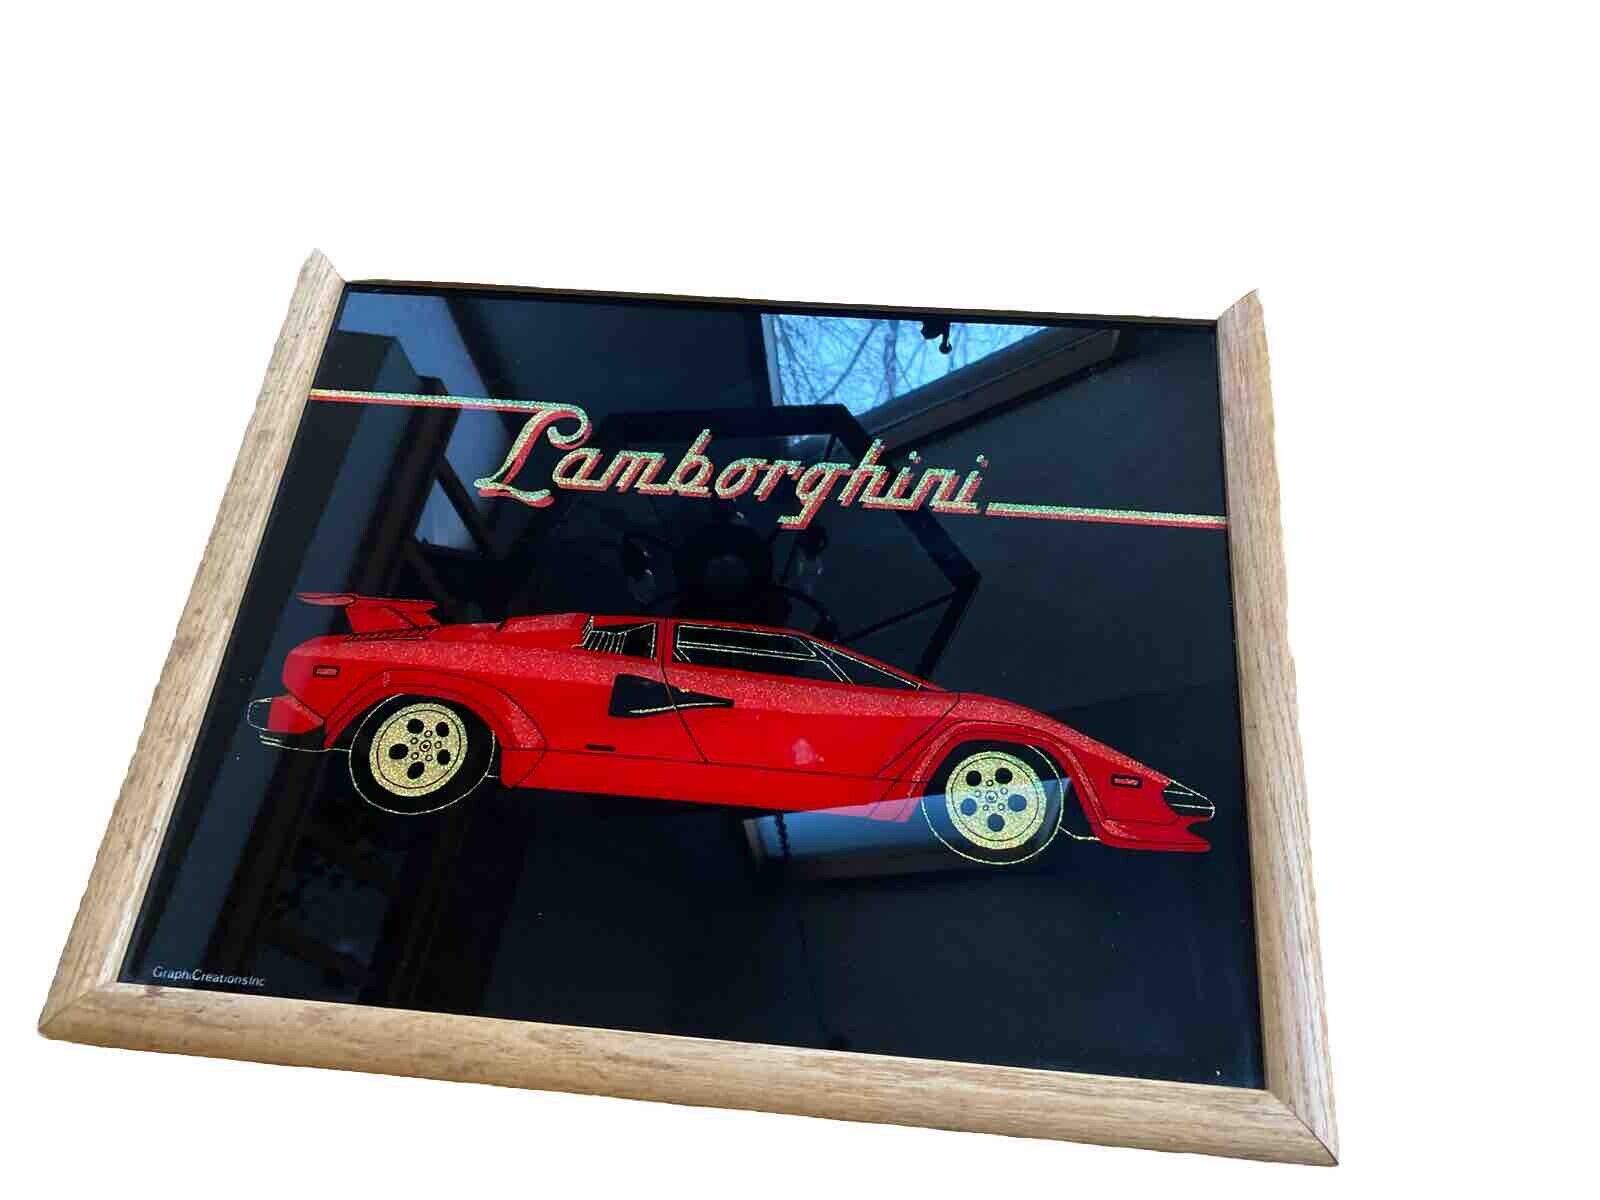 Vintage Lamborghini Glitter Glass GraphiCreations Wood Framed Picture 21 X17